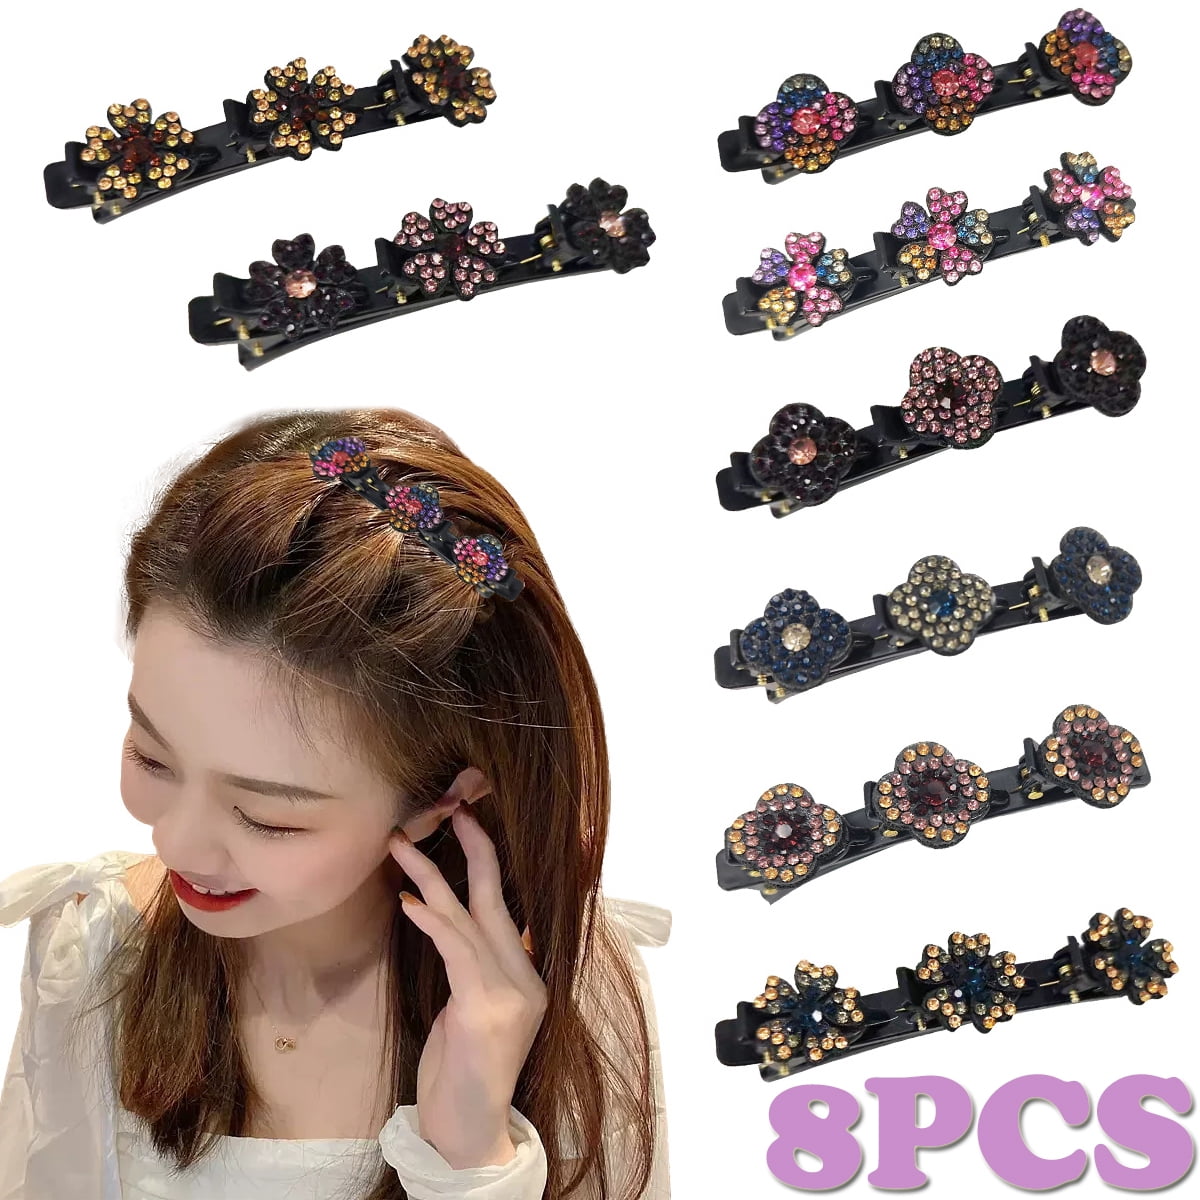 15 Pcs Hairpin Hair Styling Accessories Girls Hair Accessories Hair Gems  for Women Womens Hair Clips Hair Stick for Buns Hair Pin Hair Style  Accessories Long Hair Stick Hair Sticks 